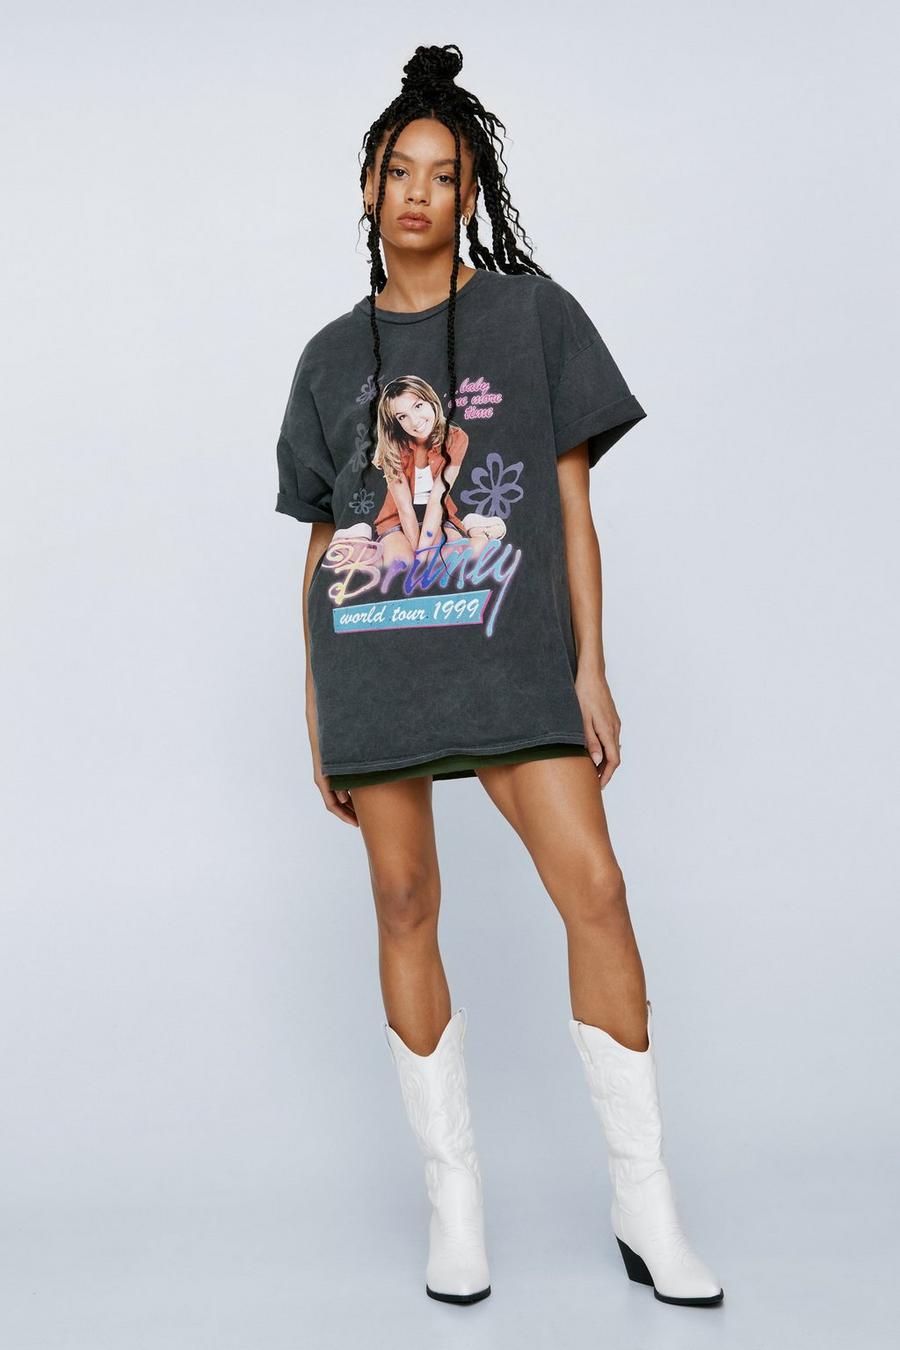 Britney Spears Tour Extreme Oversized Graphic Tee